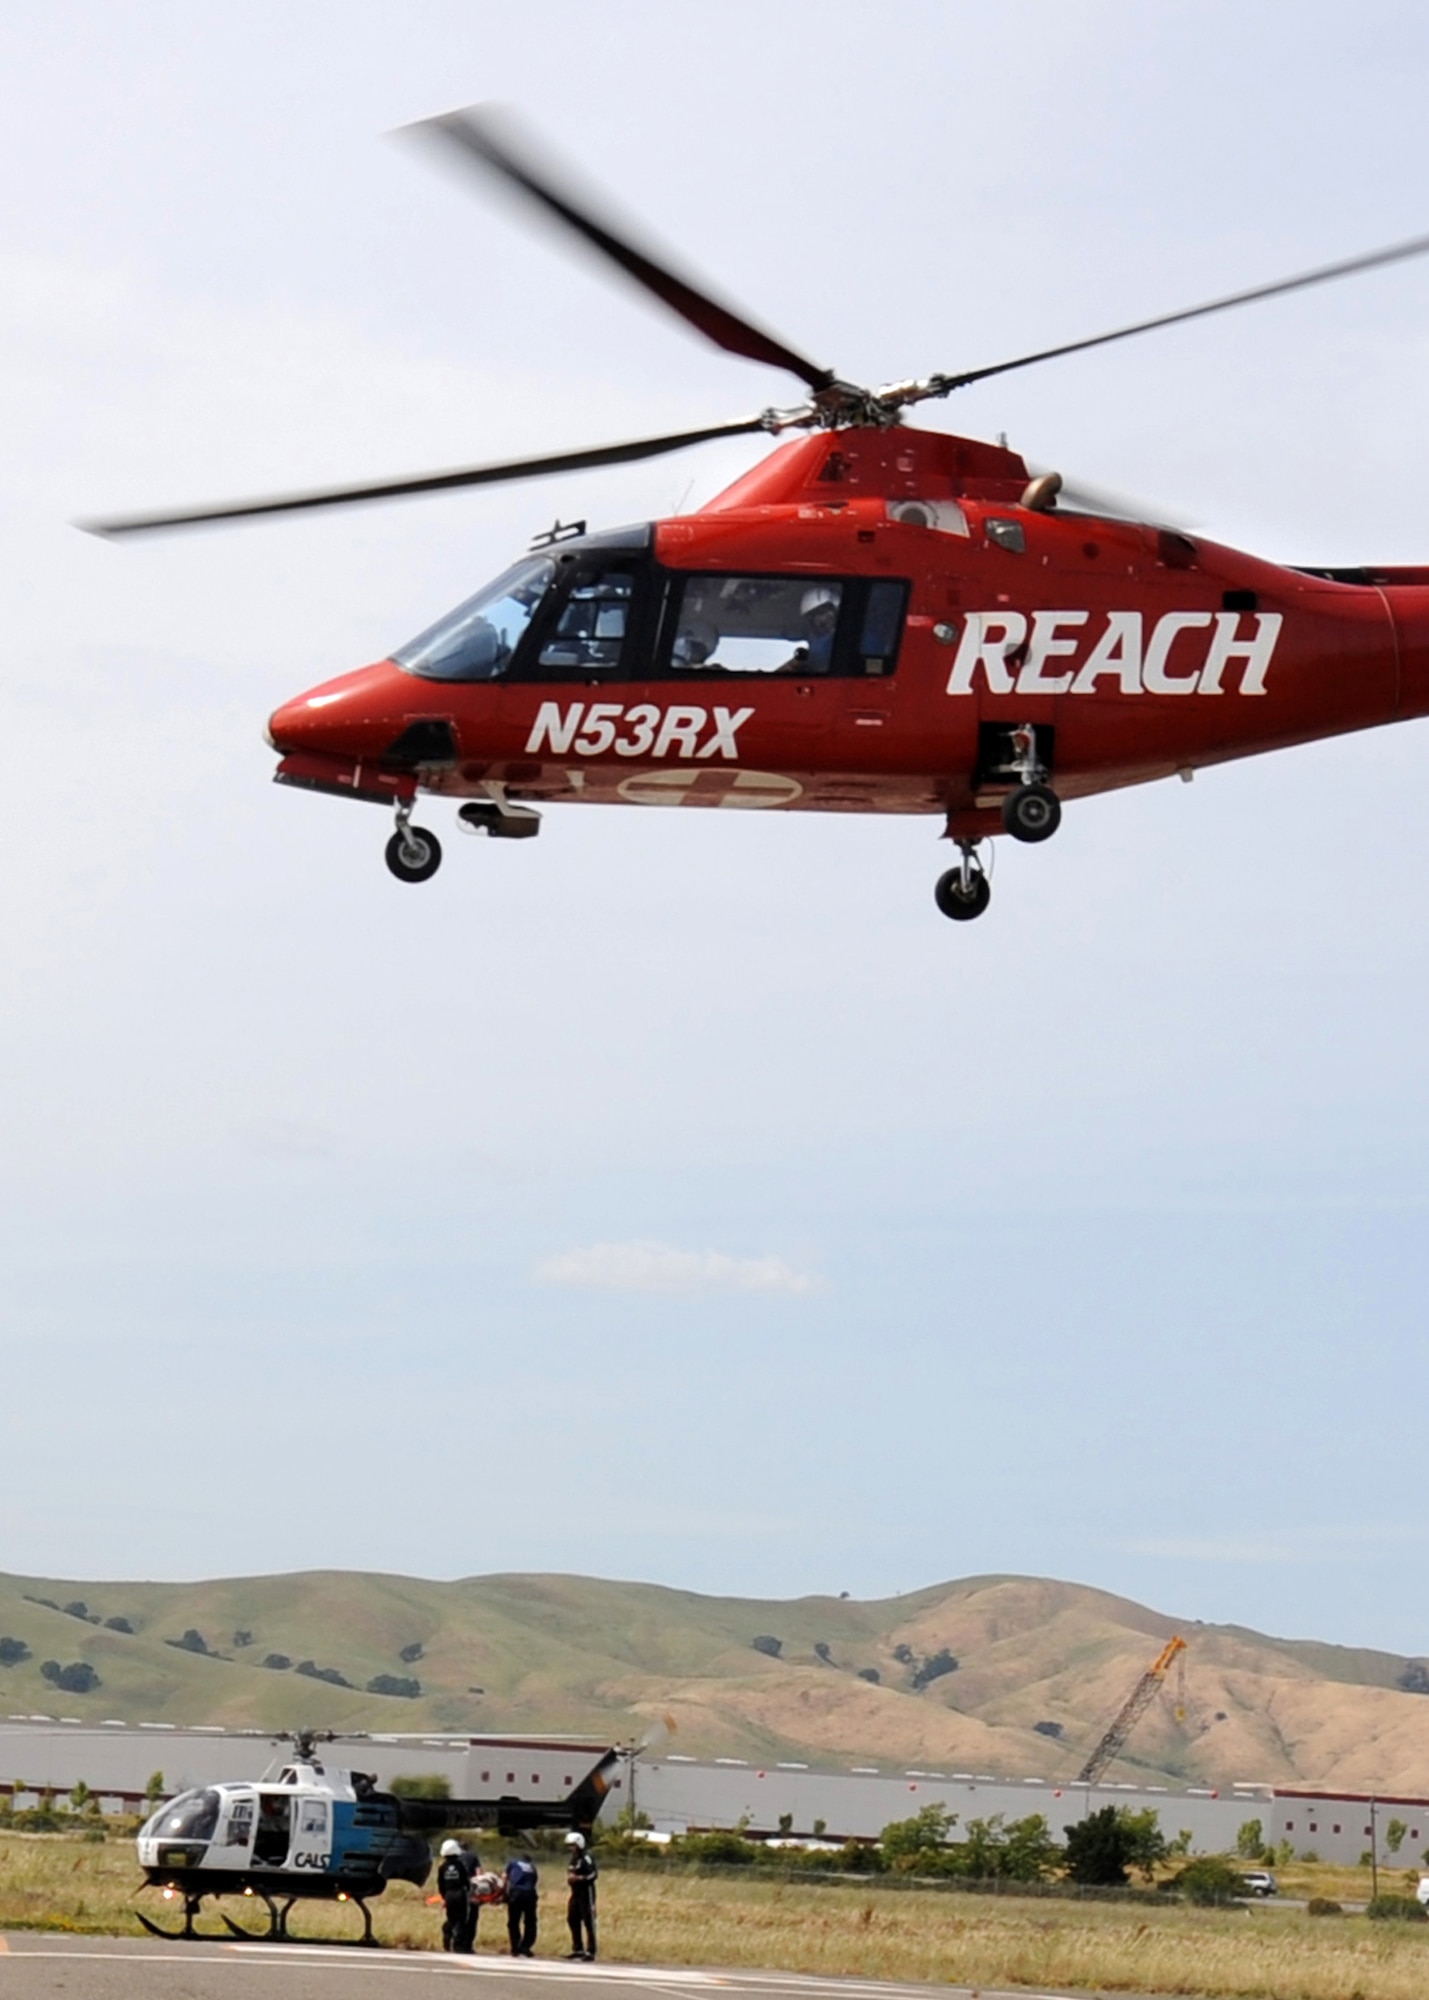 A civilian air ambulance transports a simulated injured patient at an emergency response exercise at Travis Air Force Base, California on 12 May 2010.  Military personal and local civilian emergency organizations worked together during the exercise.  (U.S. Air Force photo by Civ/Jay Trottier)